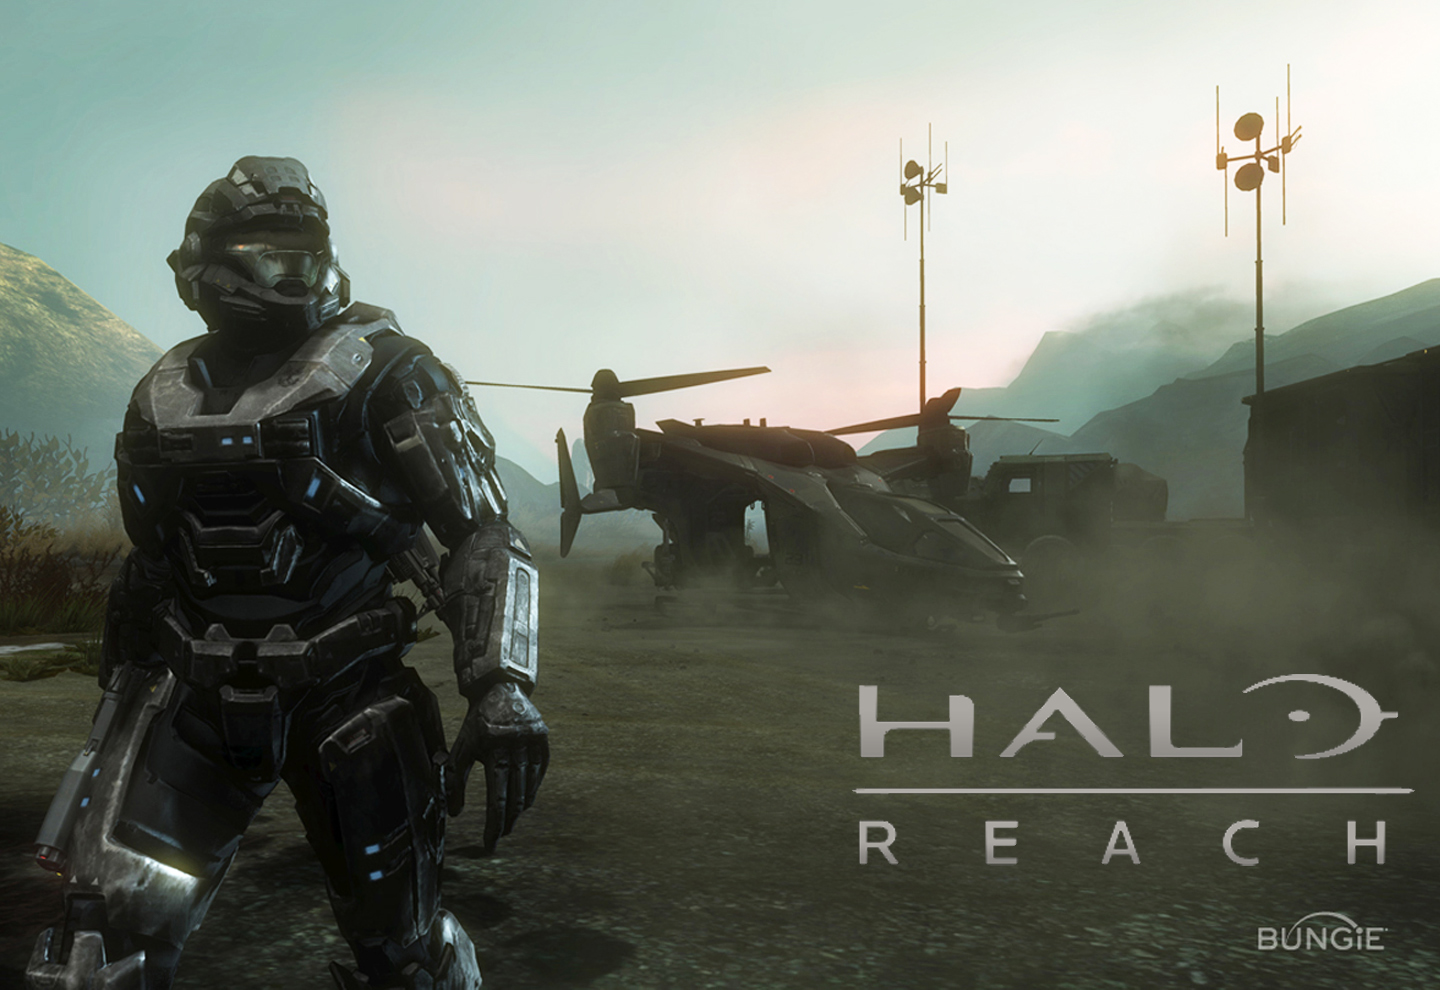 Halo Reach Wallpapers Attachment 14481 - Amazing Wallpaperz